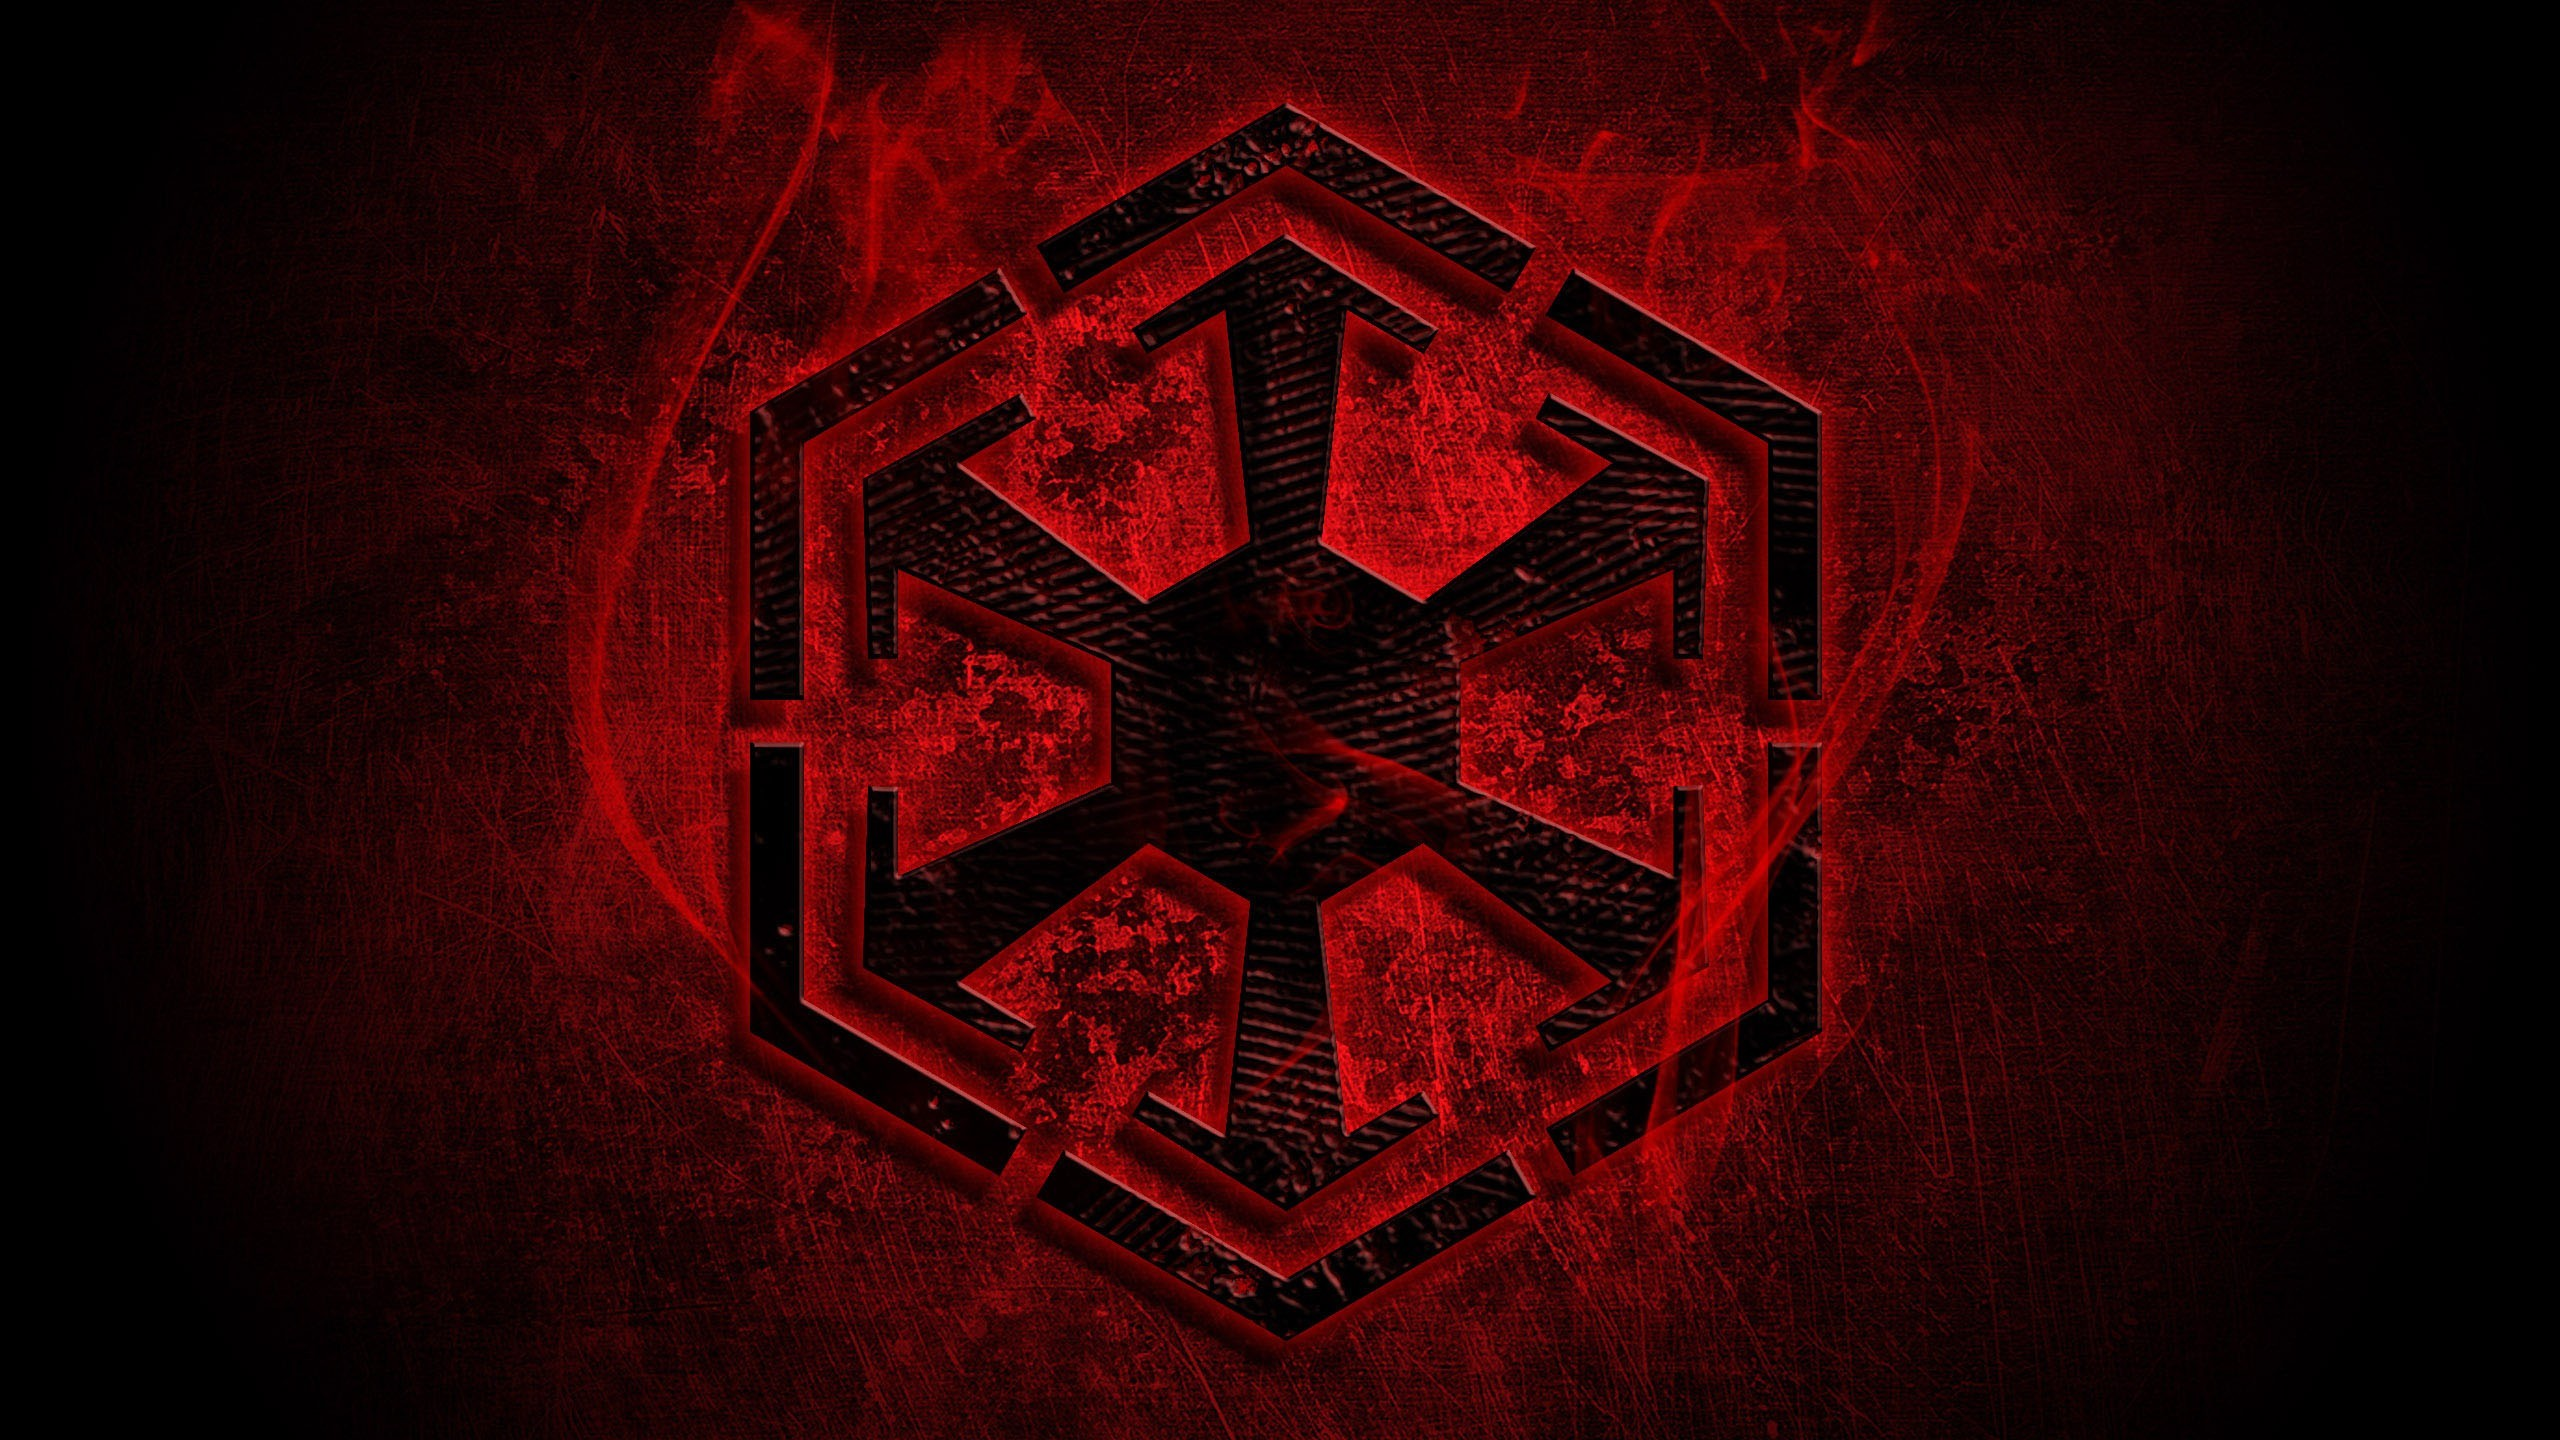 General 2560x1440 Star Wars logo red background science fiction